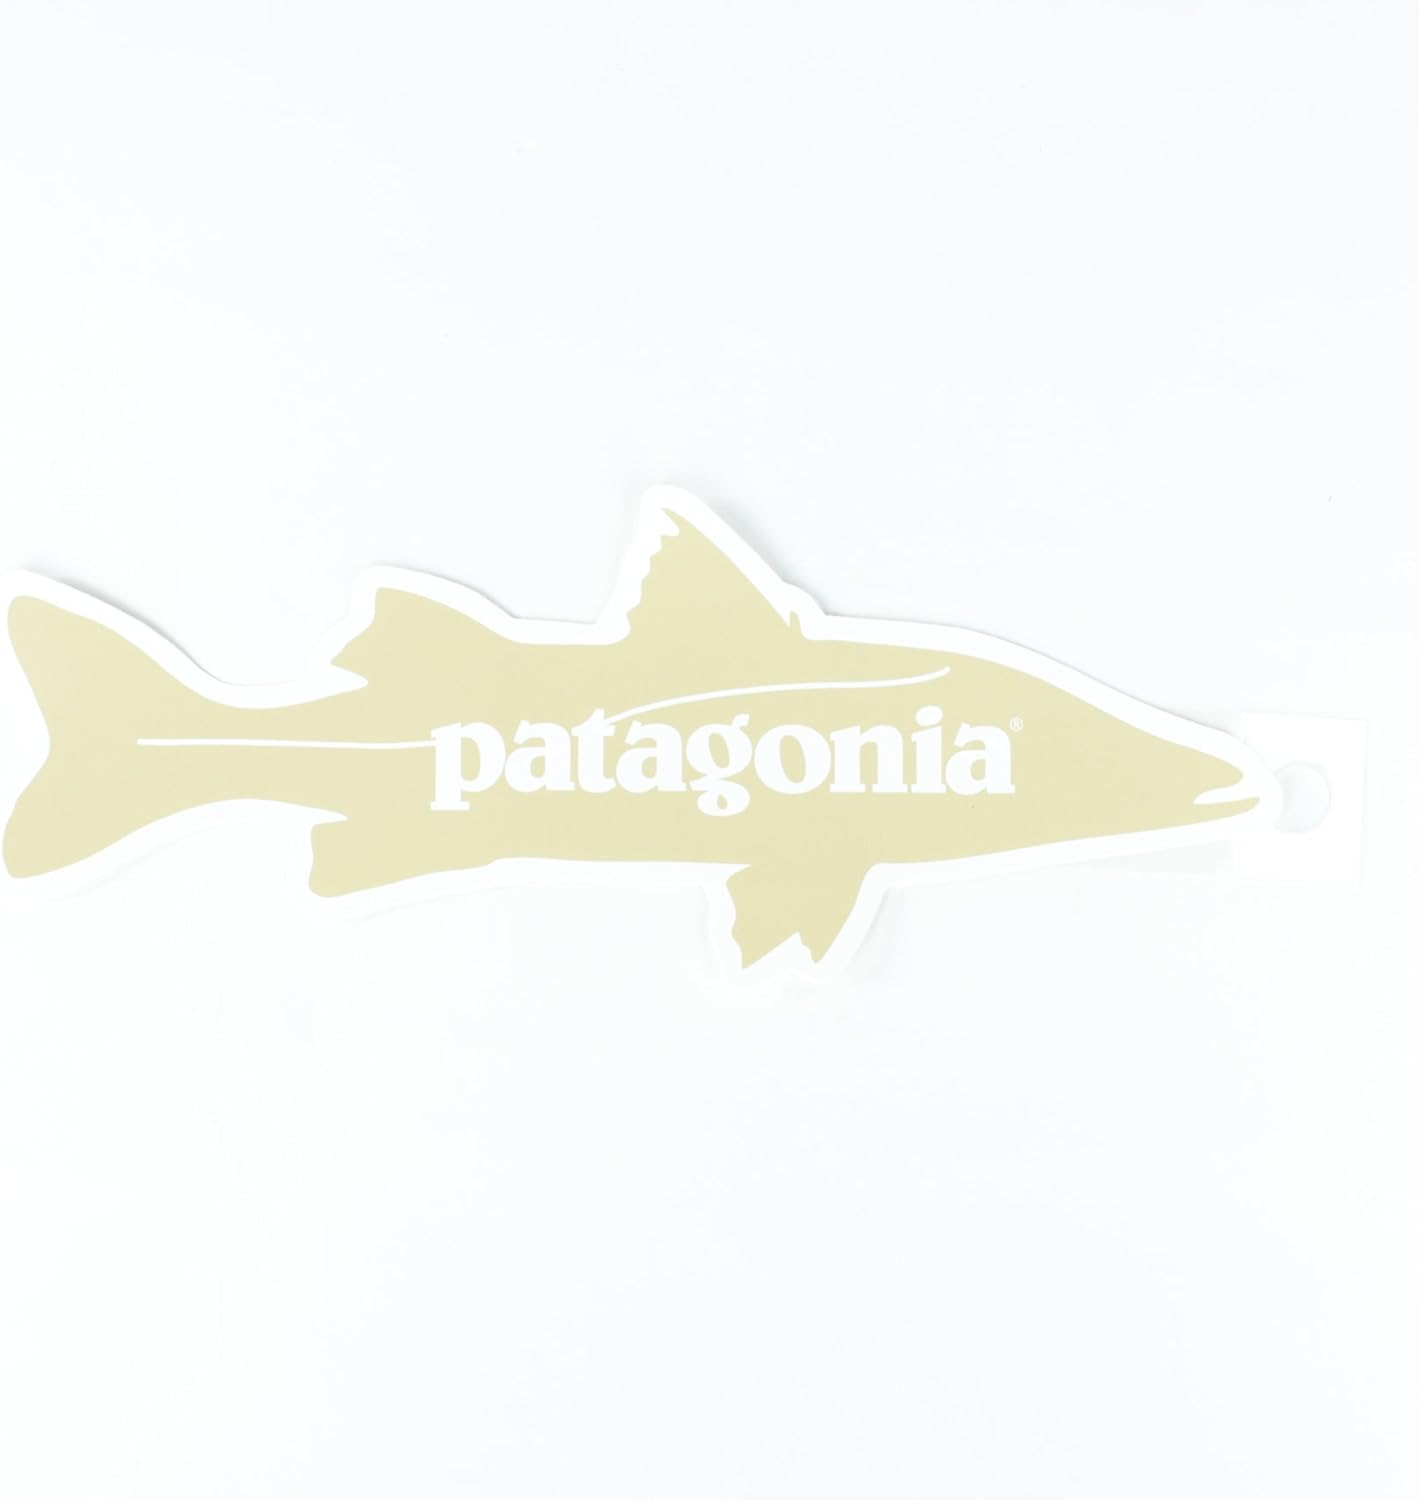 Patagonia Fish Sticker with Text